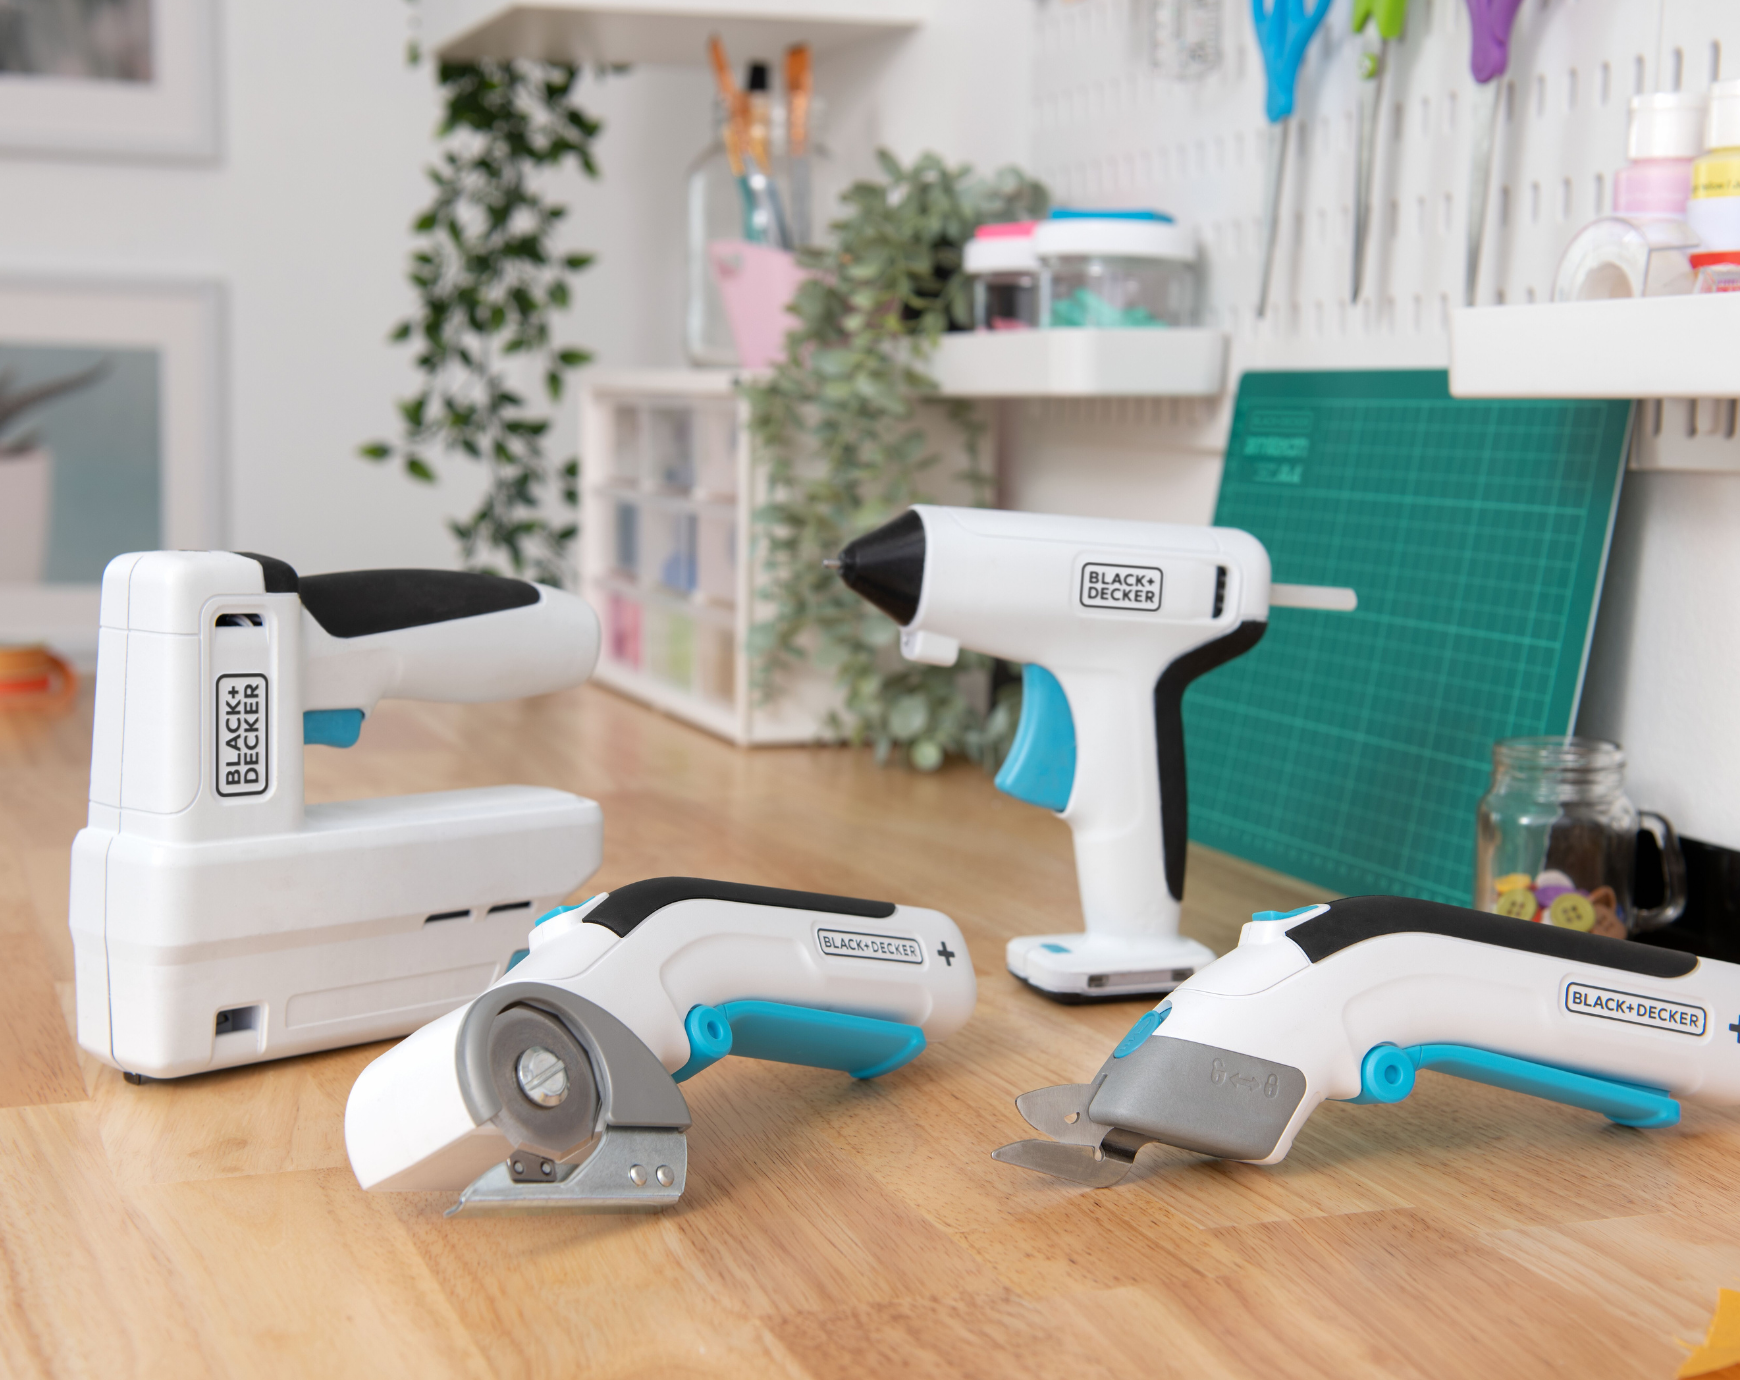 The Crafting Collection Tools by BLACK+DECKER